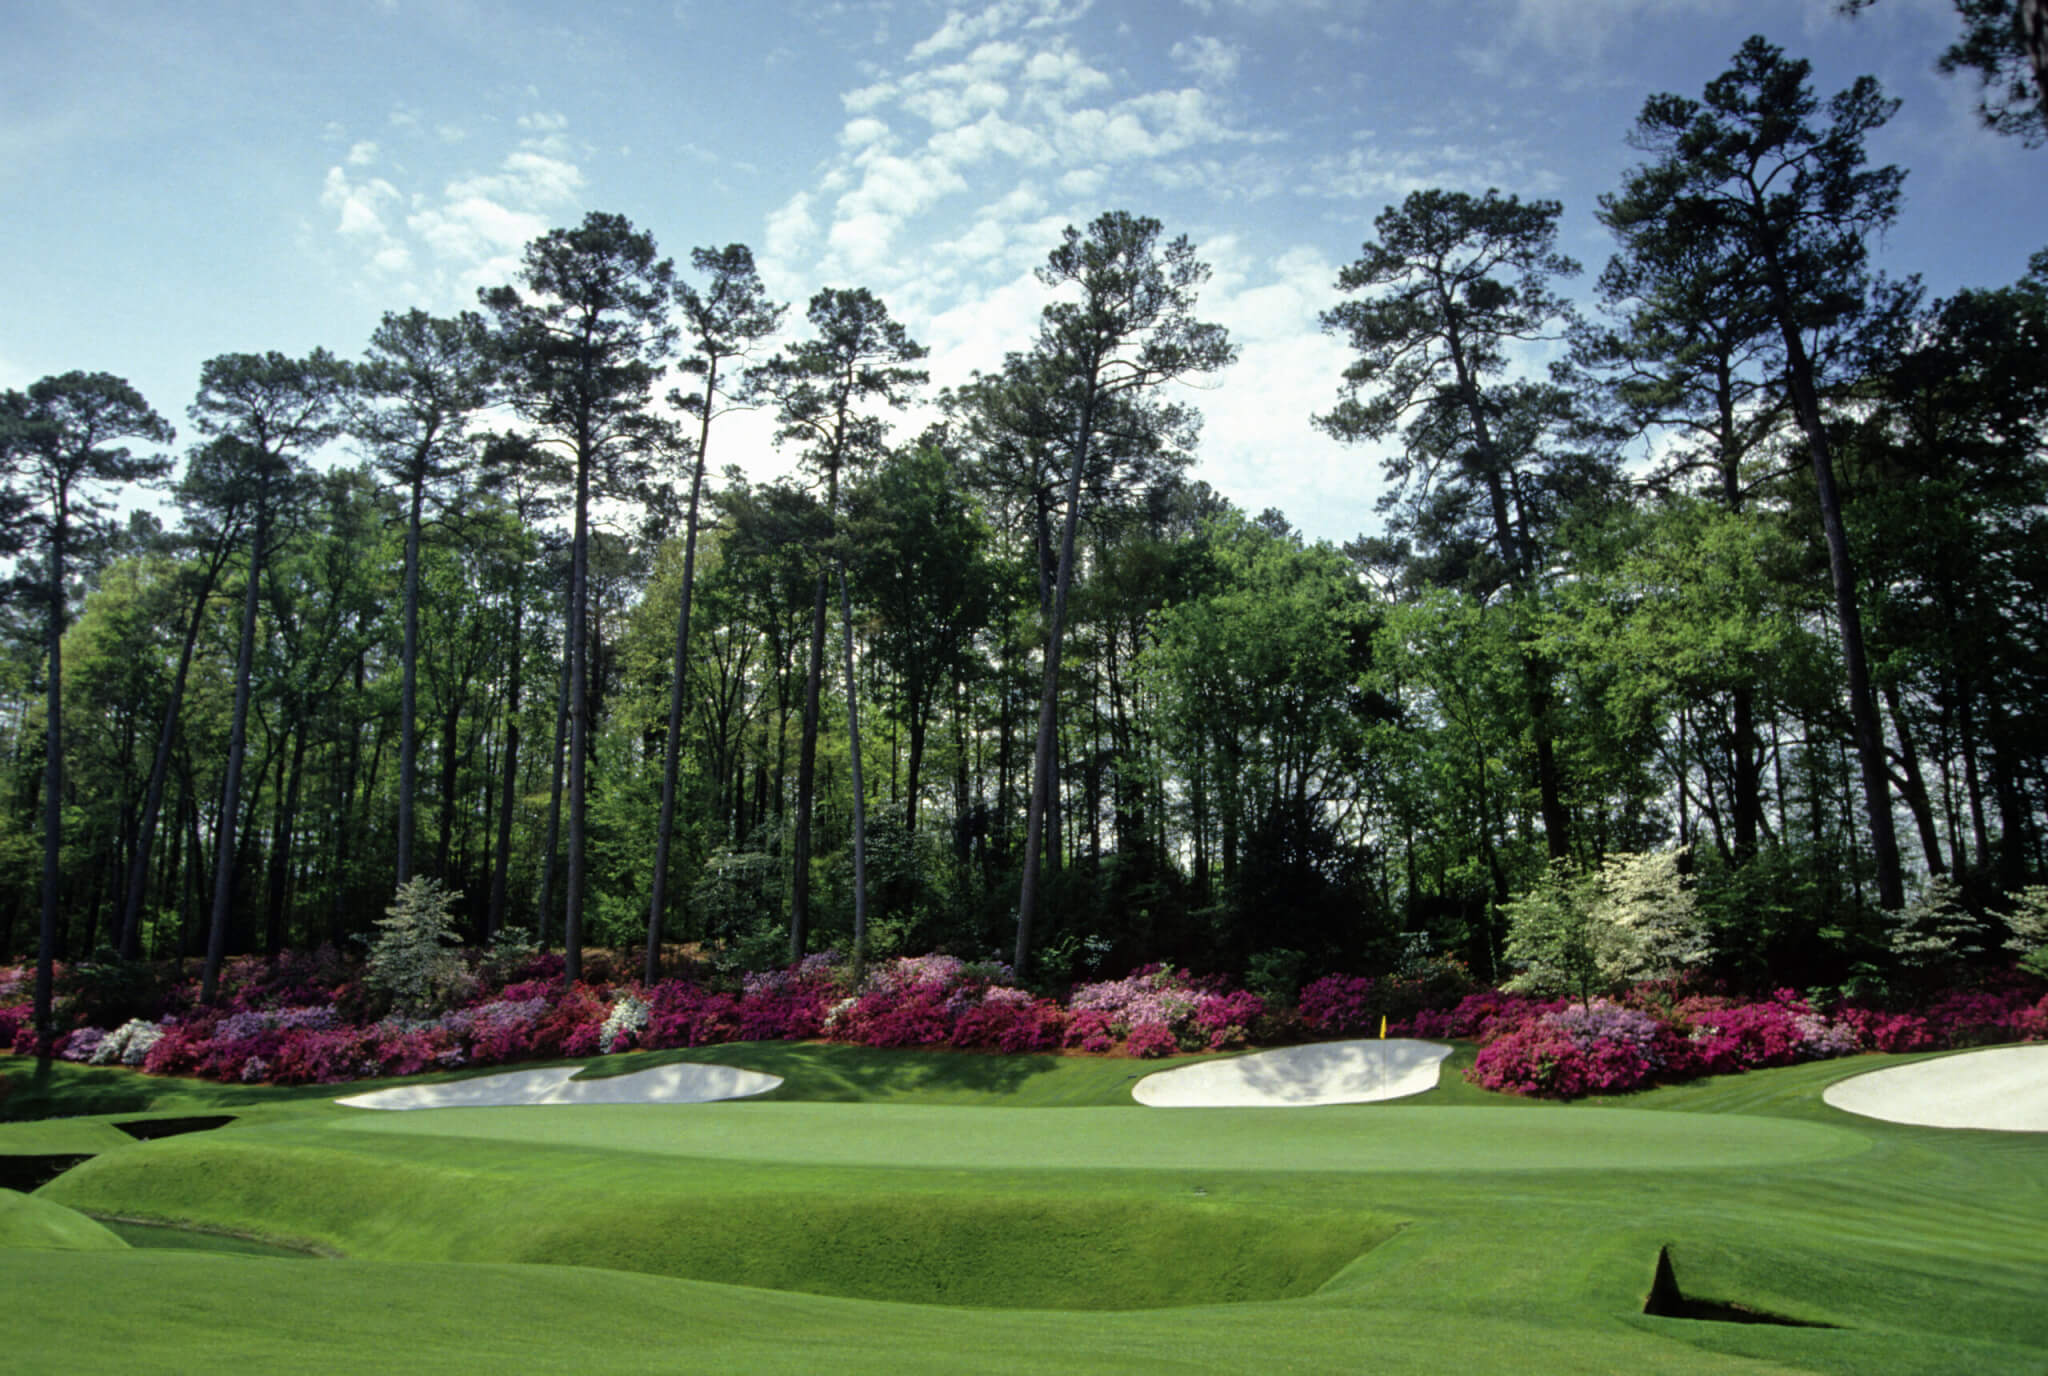 April 1991: General view of the 13th hole at Augusta National Golf Course during the US Masters. The Augusta National Golf Club, located in Augusta, Georgia was founded by Bobby Jones and Clifford Roberts on the site of a former indigo plantation, the course was designed by Jones and Alister MacKenzie. AP10145907; .